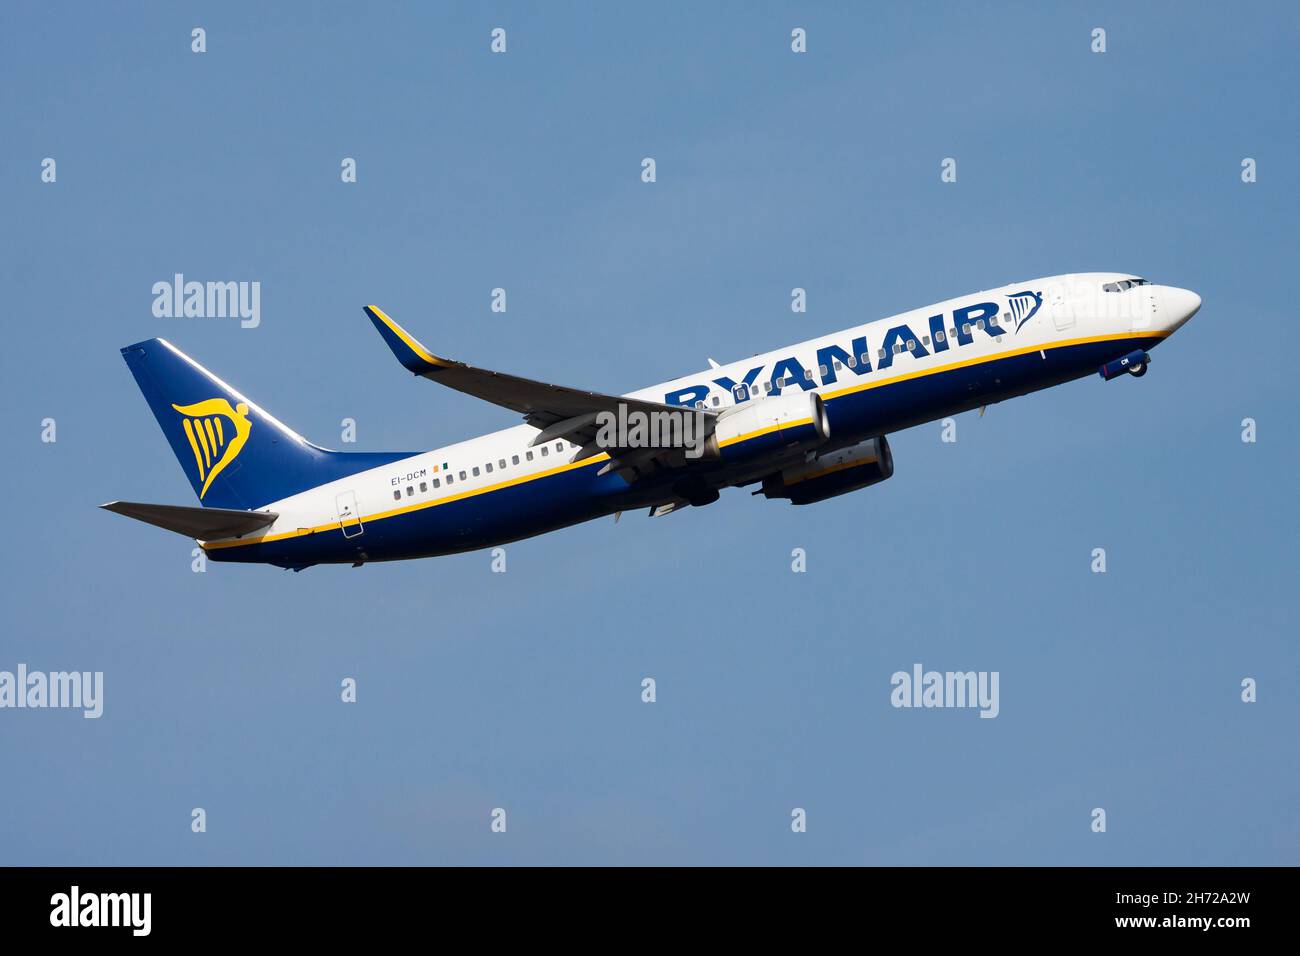 Eindhoven, Netherlands - April 16, 2015: Ryanair passenger plane at airport. Schedule flight travel. Aviation and aircraft. Air transport. Global inte Stock Photo